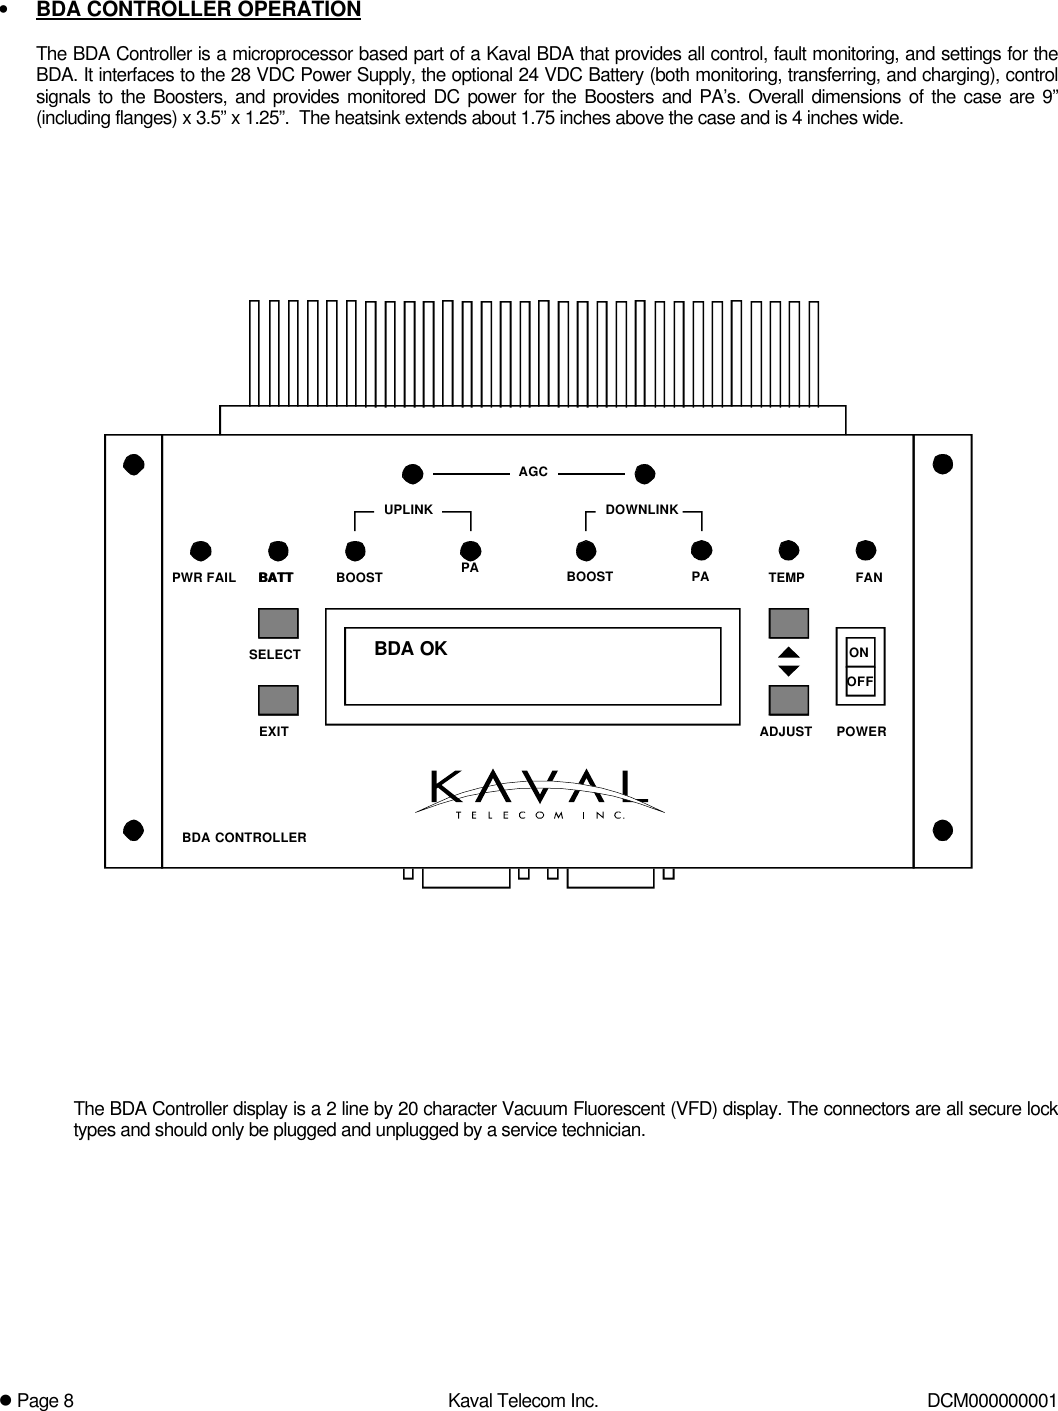 l Page 8Kaval Telecom Inc. DCM000000001• BDA CONTROLLER OPERATIONThe BDA Controller is a microprocessor based part of a Kaval BDA that provides all control, fault monitoring, and settings for theBDA. It interfaces to the 28 VDC Power Supply, the optional 24 VDC Battery (both monitoring, transferring, and charging), controlsignals to the Boosters, and provides monitored DC power for the Boosters and PA’s. Overall dimensions of the case are 9”(including flanges) x 3.5” x 1.25”.  The heatsink extends about 1.75 inches above the case and is 4 inches wide.BDA OKBATT PAAGCBOOST PADOWNLINKUPLINKBDA CONTROLLERPWR FAIL TEMP FANONOFFPOWEREXITSELECTADJUSTBATT BOOSTThe BDA Controller display is a 2 line by 20 character Vacuum Fluorescent (VFD) display. The connectors are all secure locktypes and should only be plugged and unplugged by a service technician.